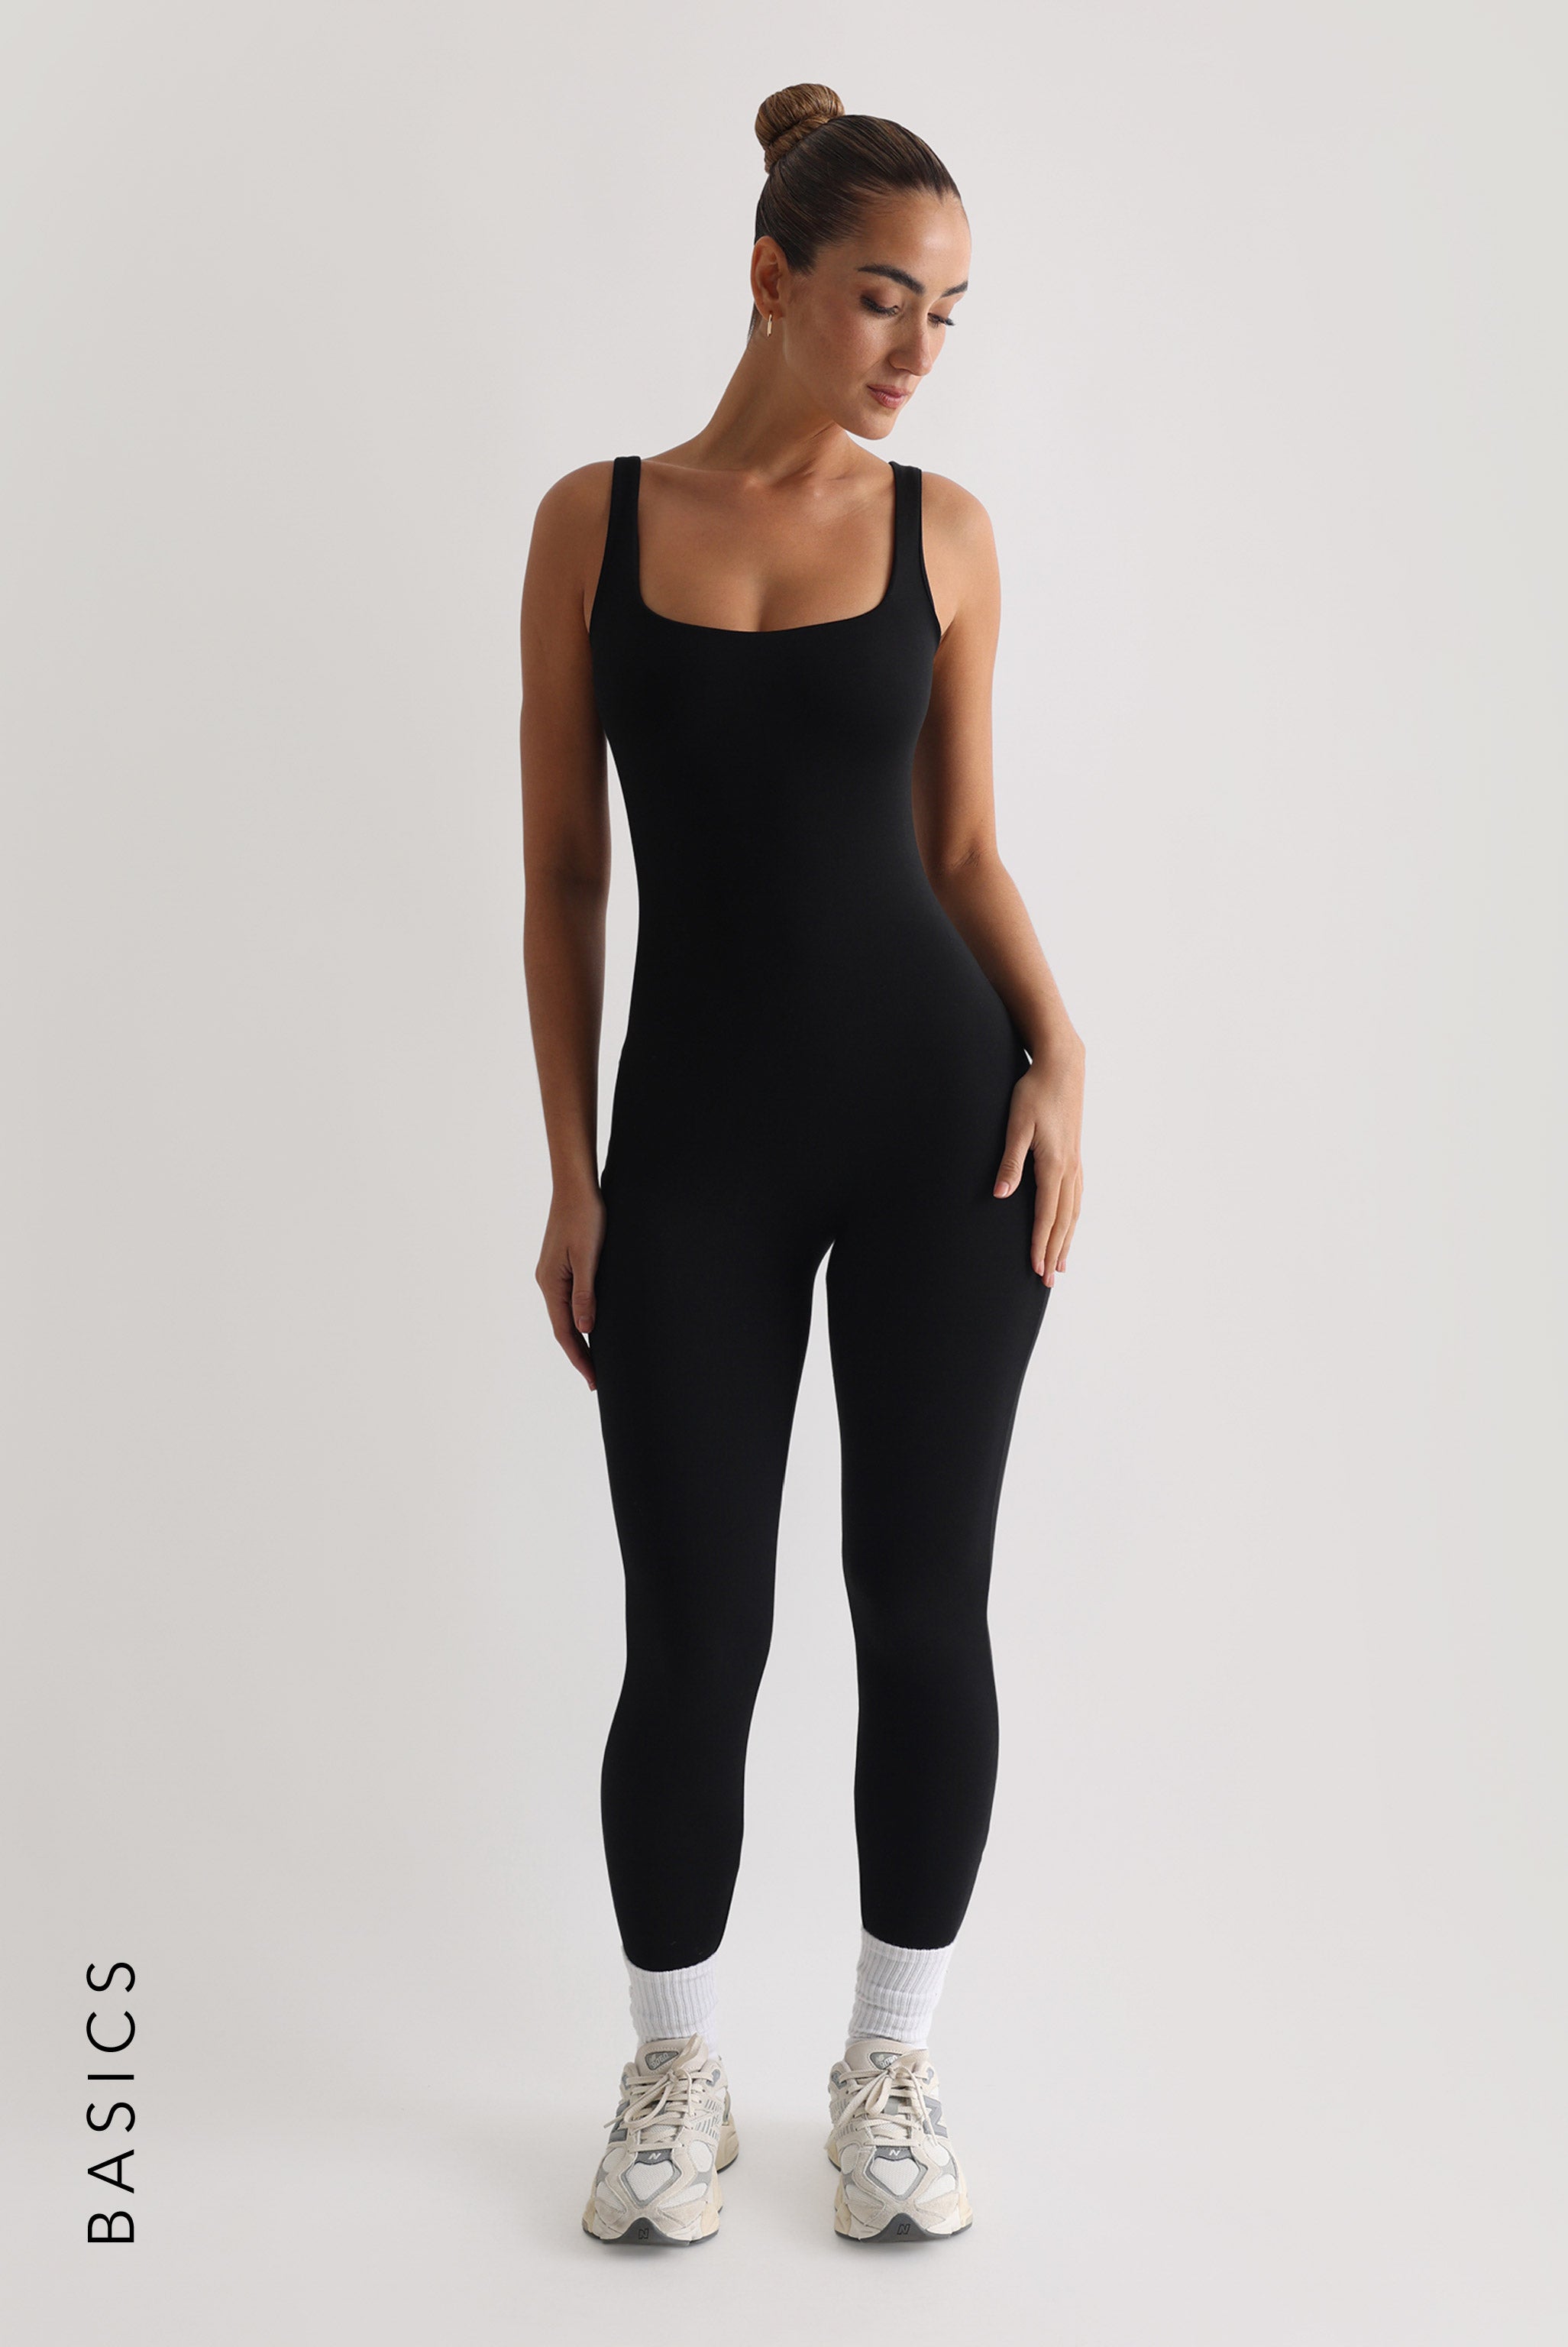 New Standard Jumpsuit - Black – My Outfit Online